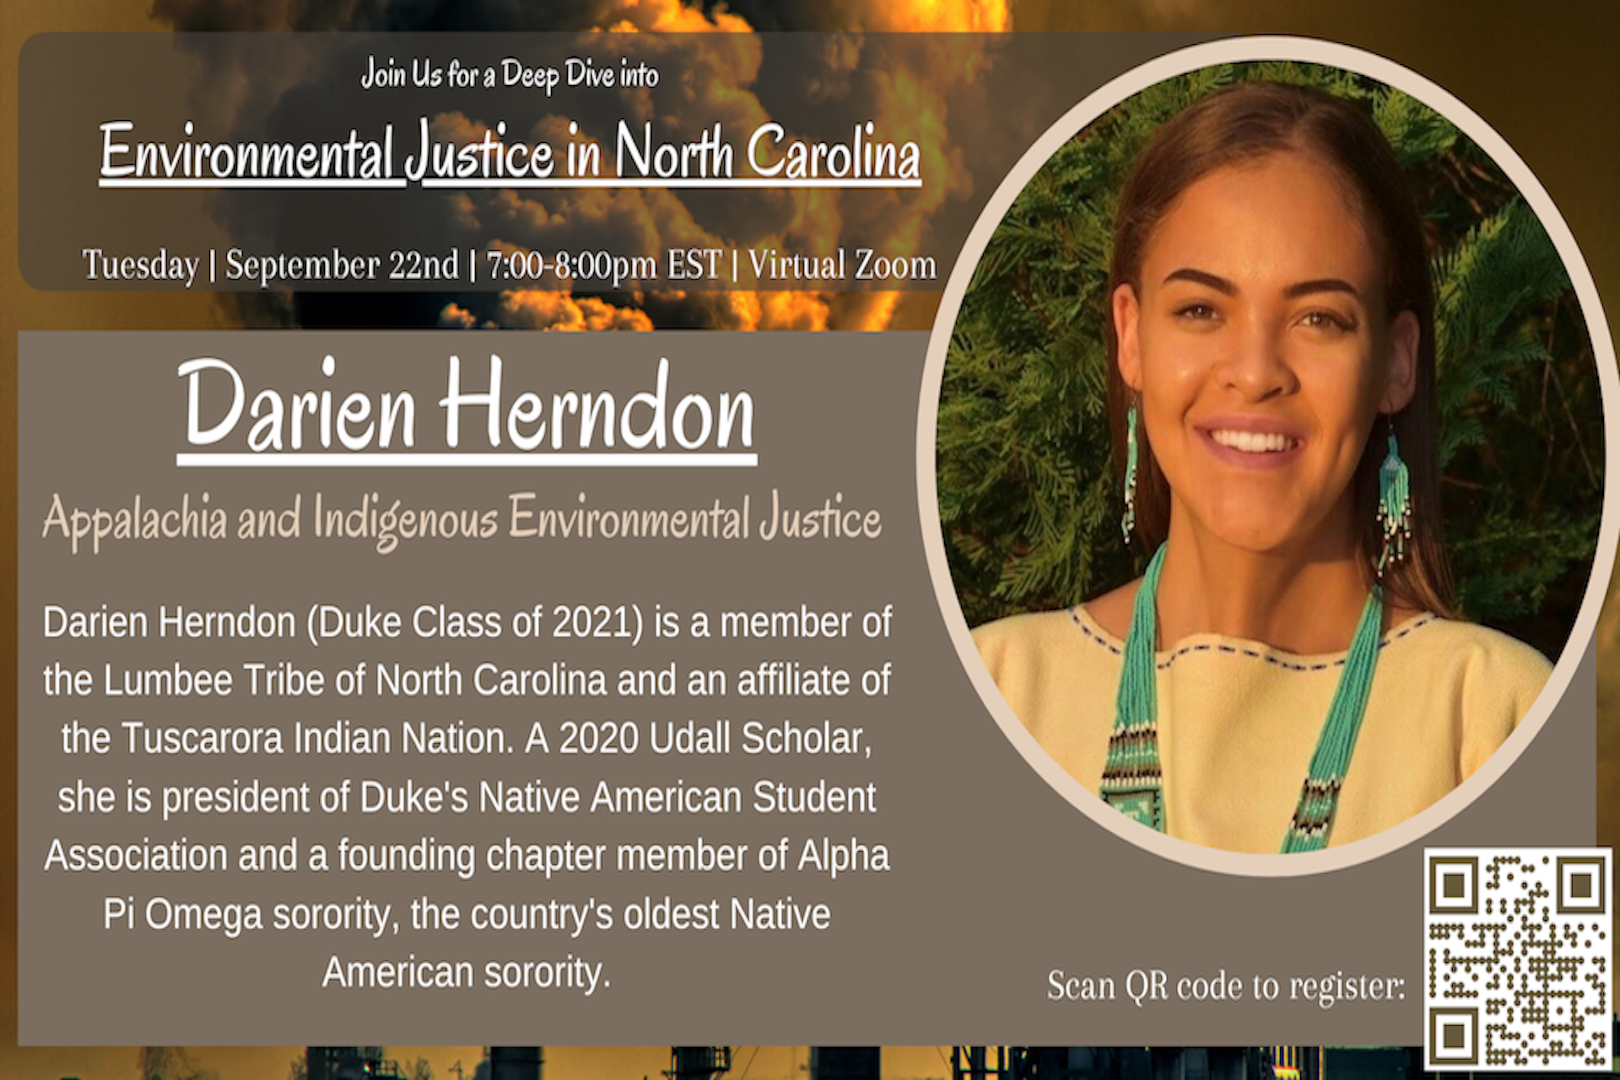 Hear from Darien Herndon (Duke Class of 2021) on Tuesday, September 22nd at 7:00 PM EST about enviromental justice issues facing indigenous and Appalachia communities! Darien is a member of the Lumbee Tribe of North Carolina and an affiliate of the Tuscarora Indian Nation. A 2020 Udall Scholar, she is president of Duke&amp;amp;amp;amp;amp;#39;s Native American Student Association and a founding chapter member of Alpha Pi Omega sorority, the country&amp;amp;amp;amp;amp;#39;s oldest Native American sorority.